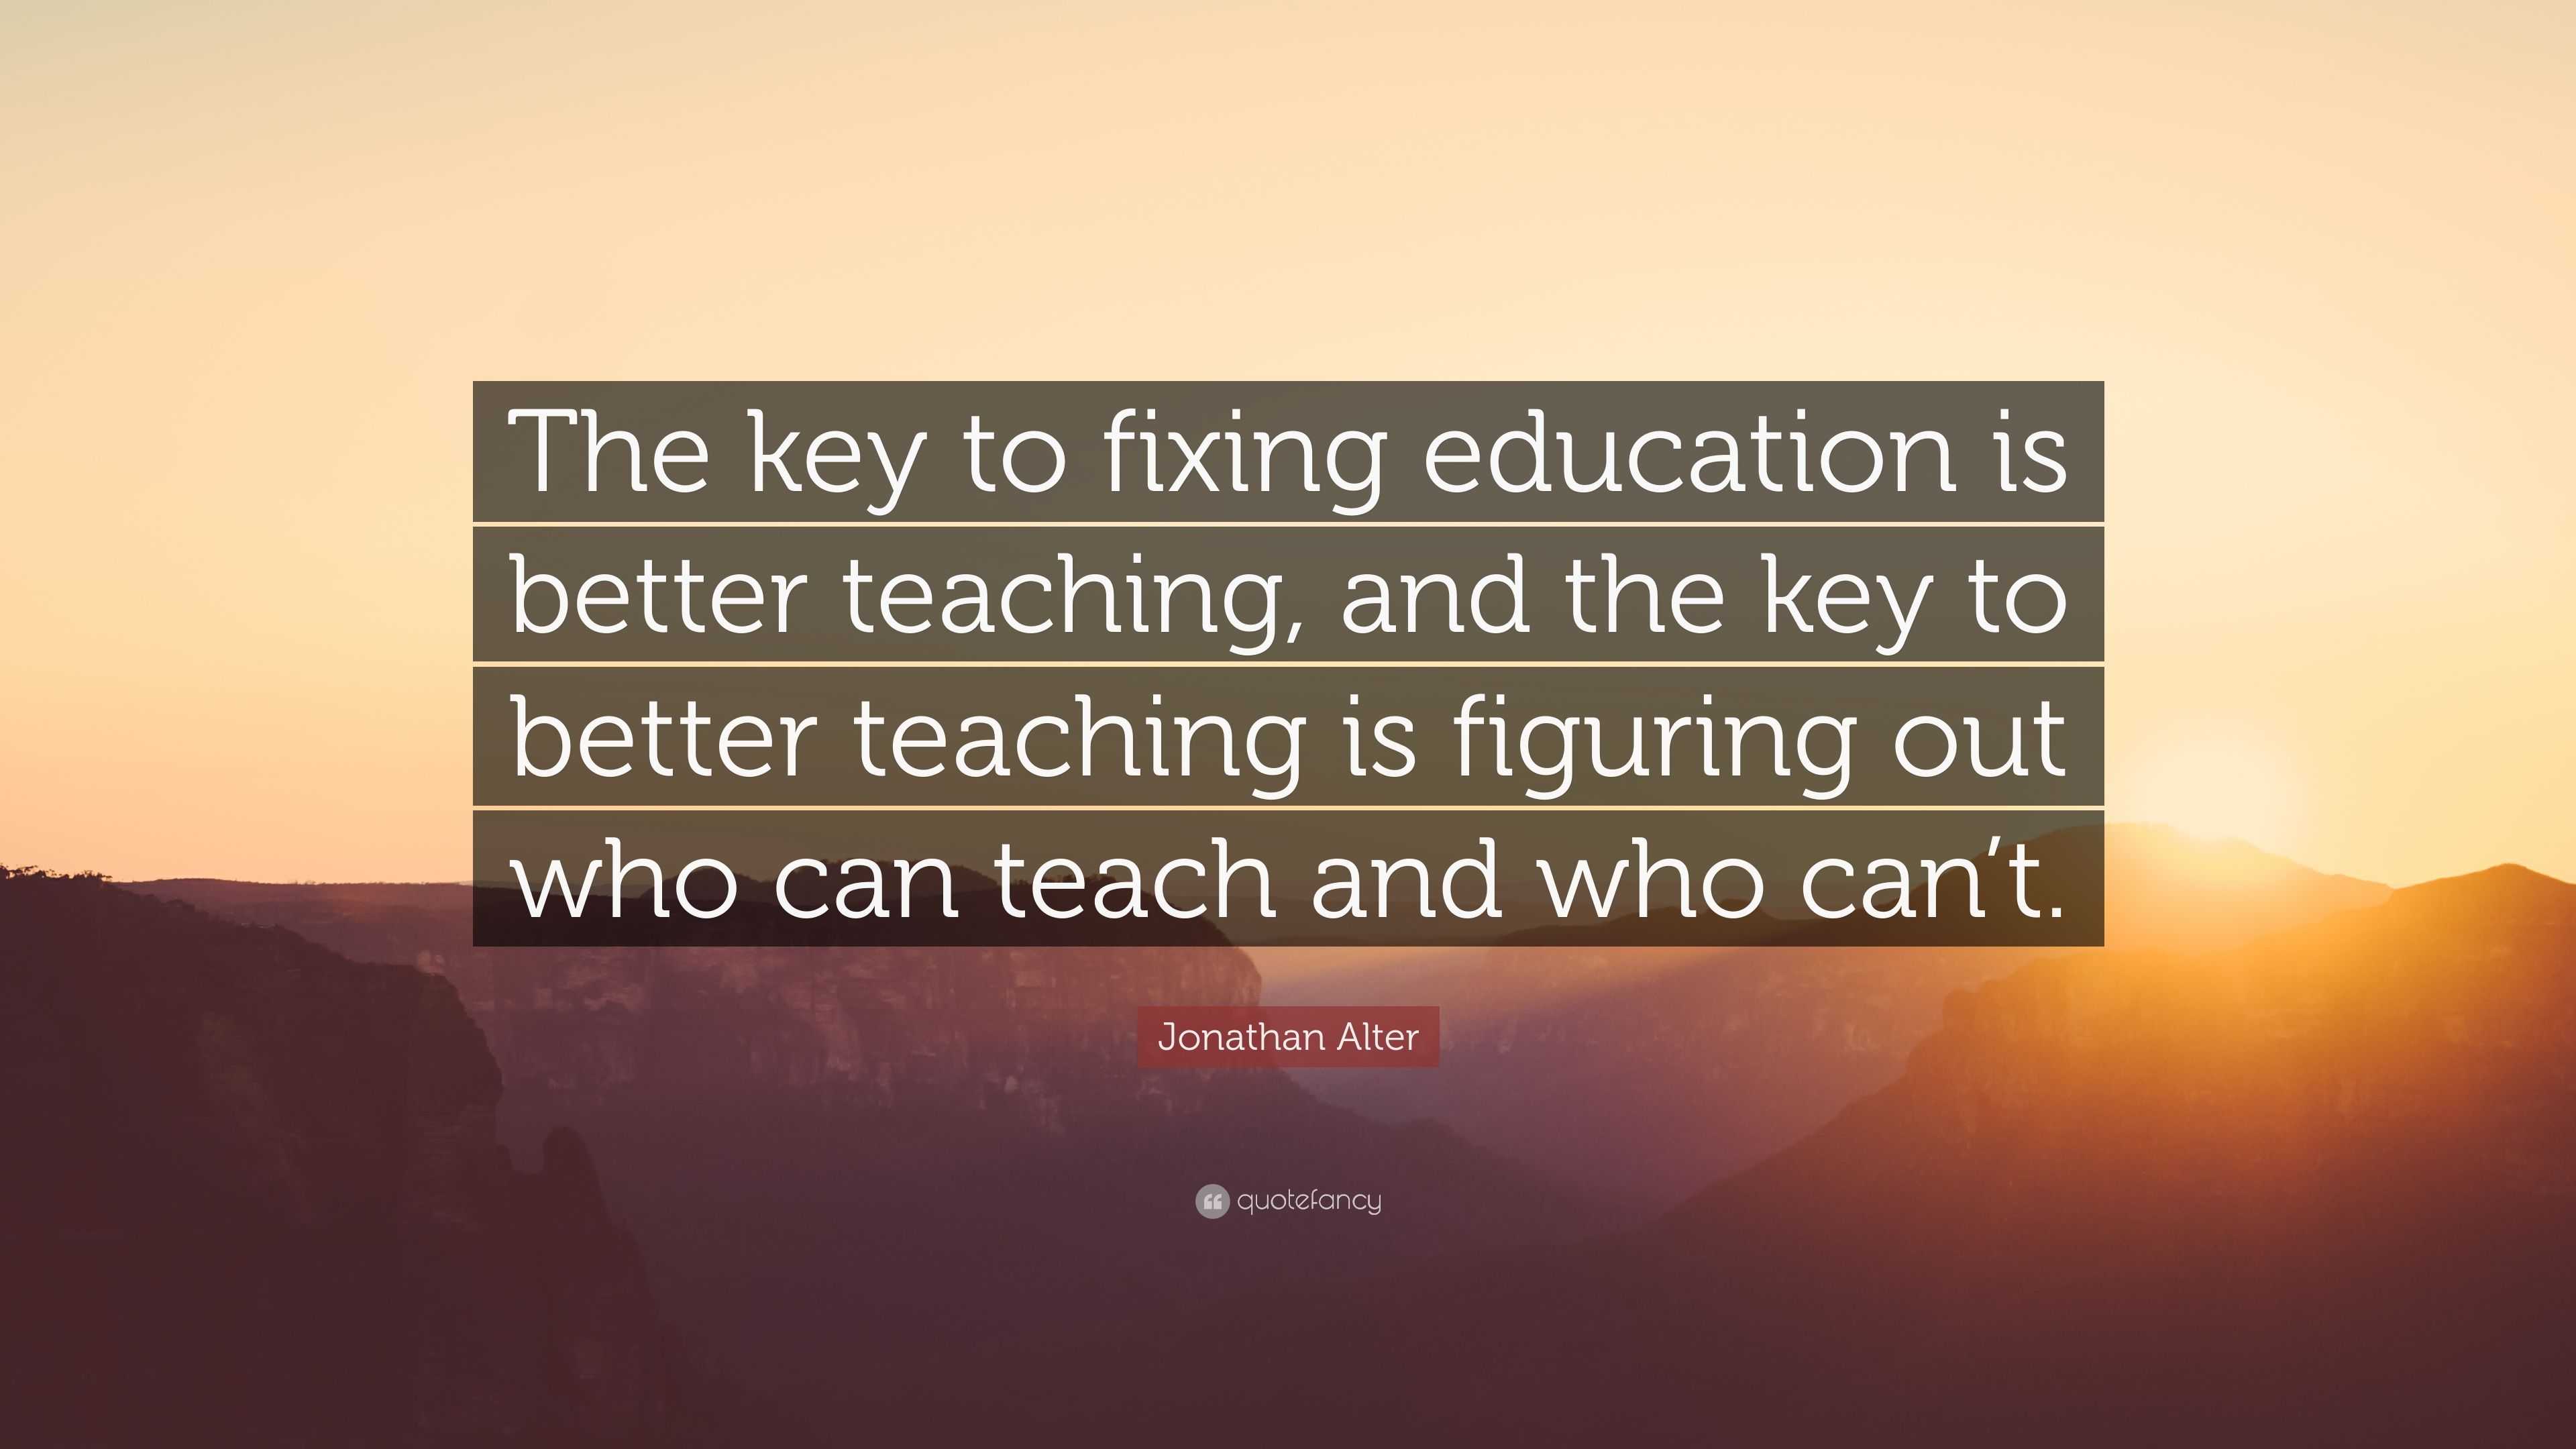 Jonathan Alter Quote: “The key to fixing education is better teaching ...